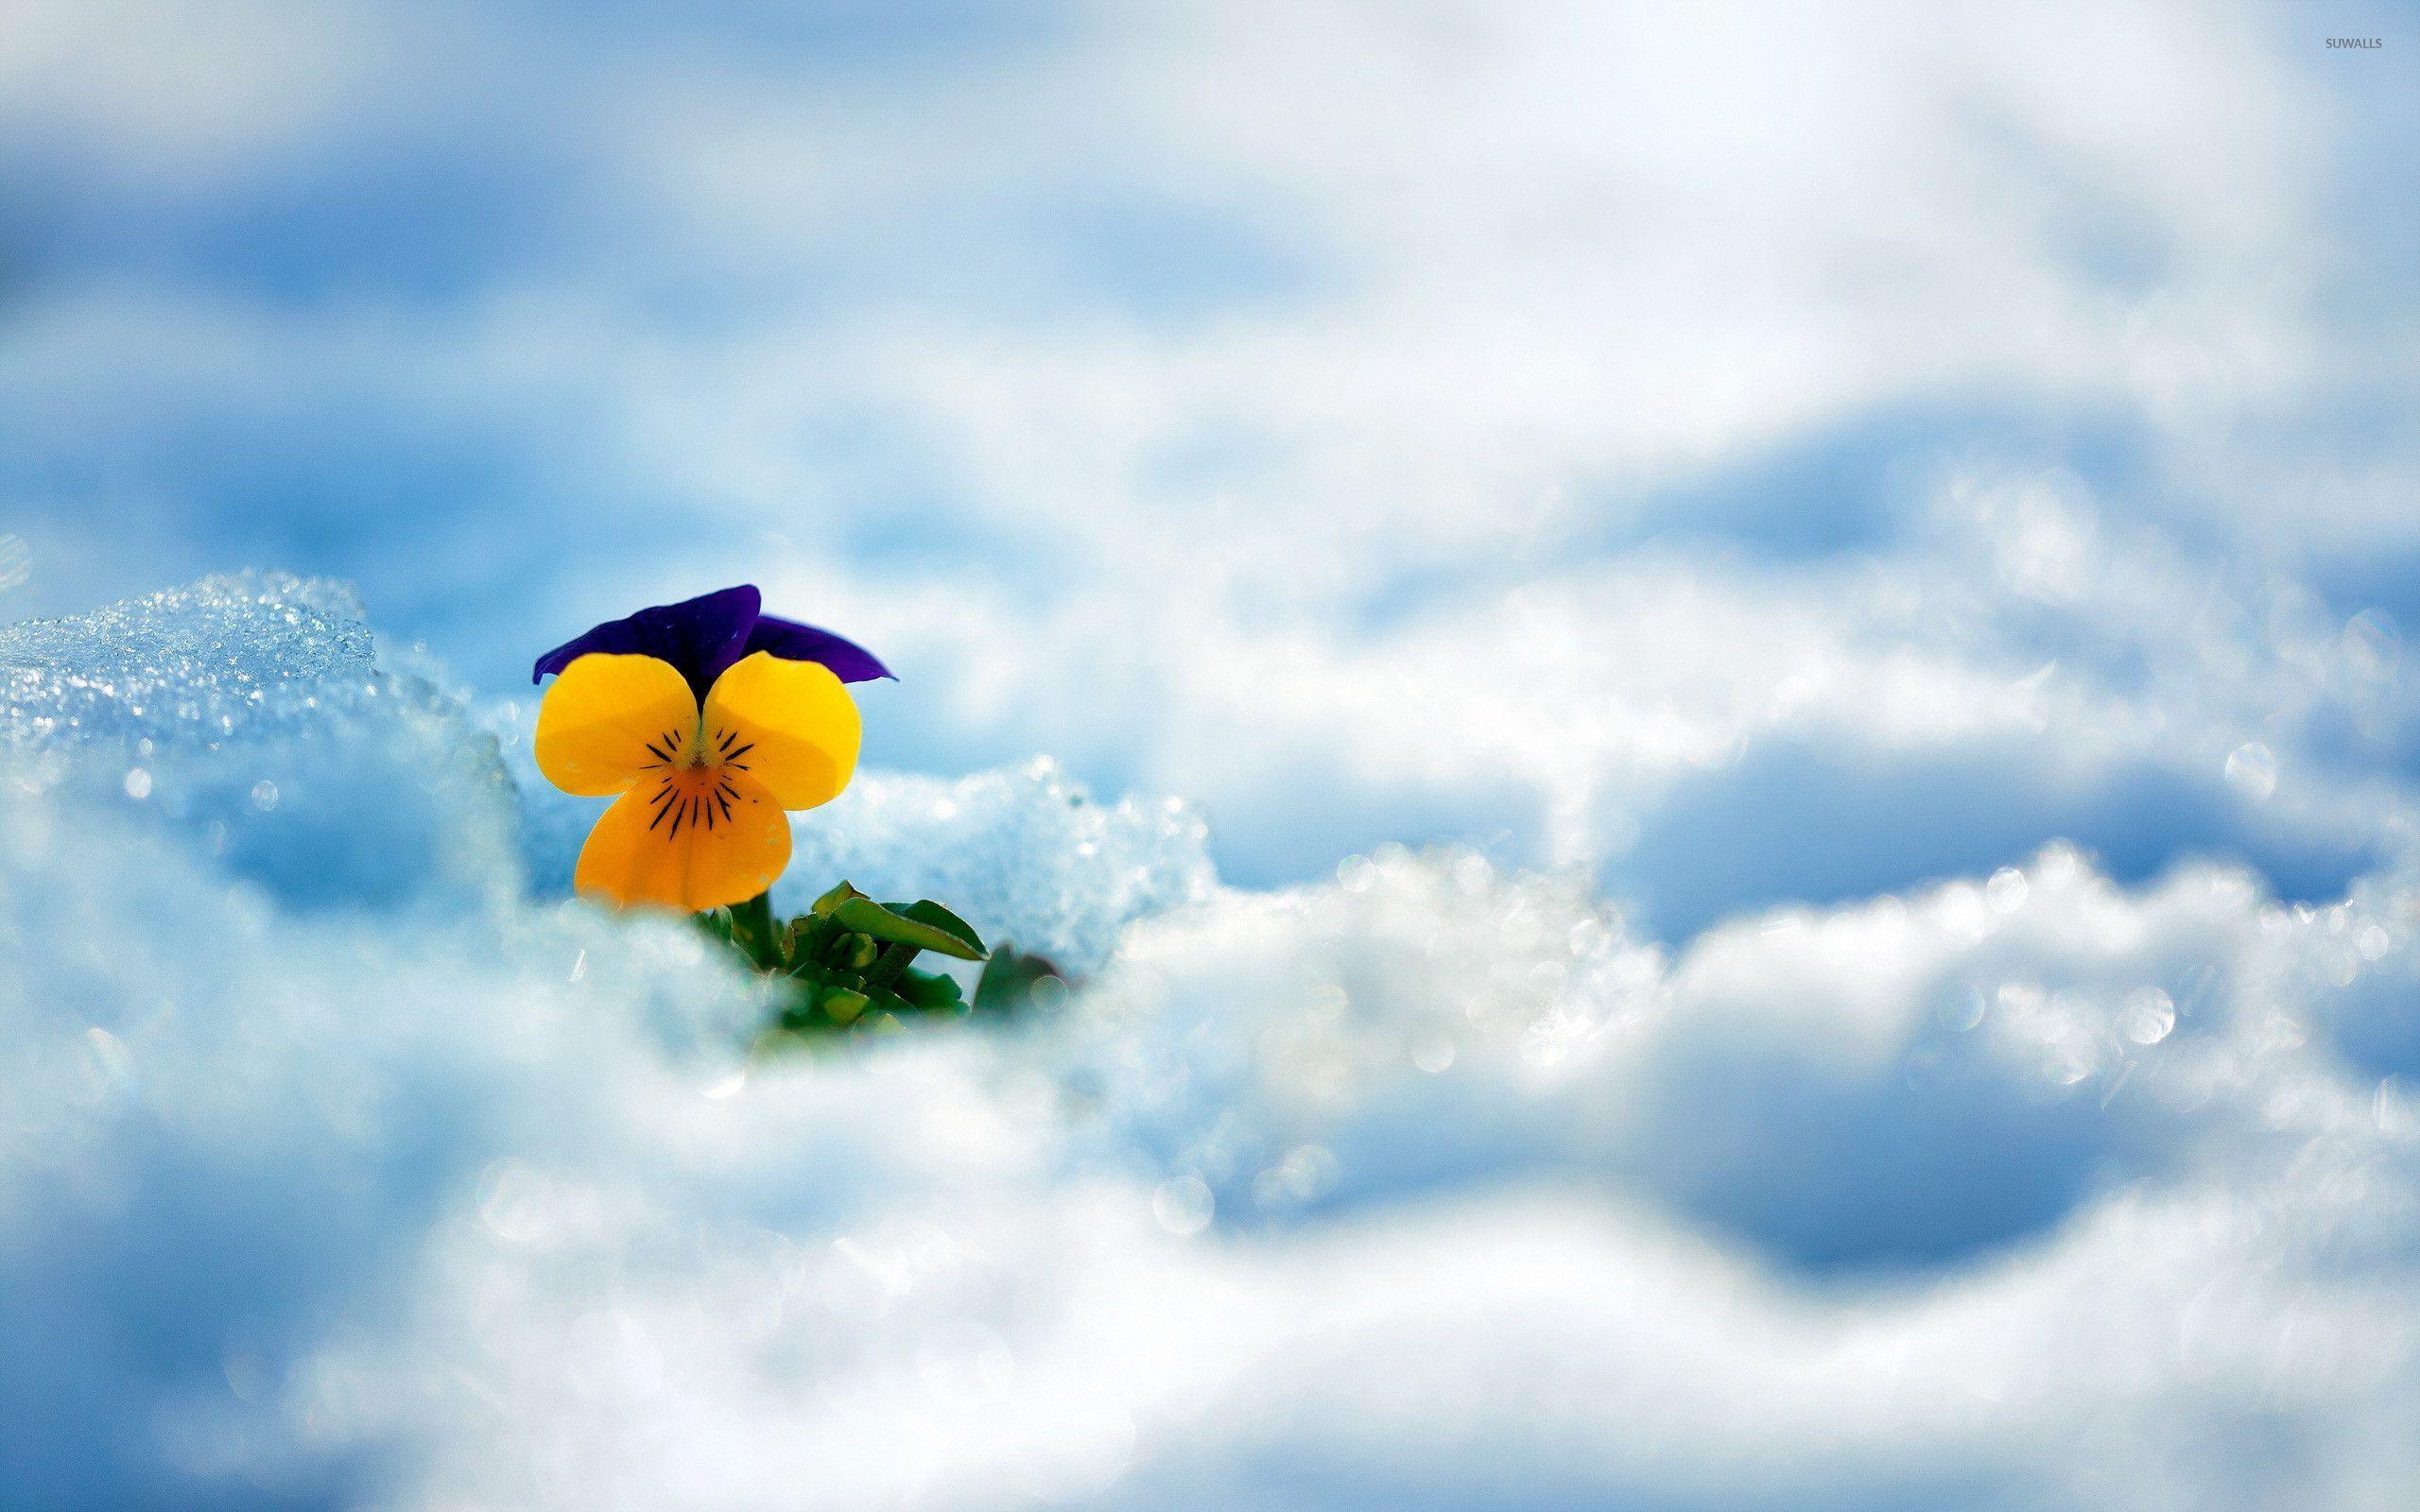 Pansy in the snow wallpaper wallpaper